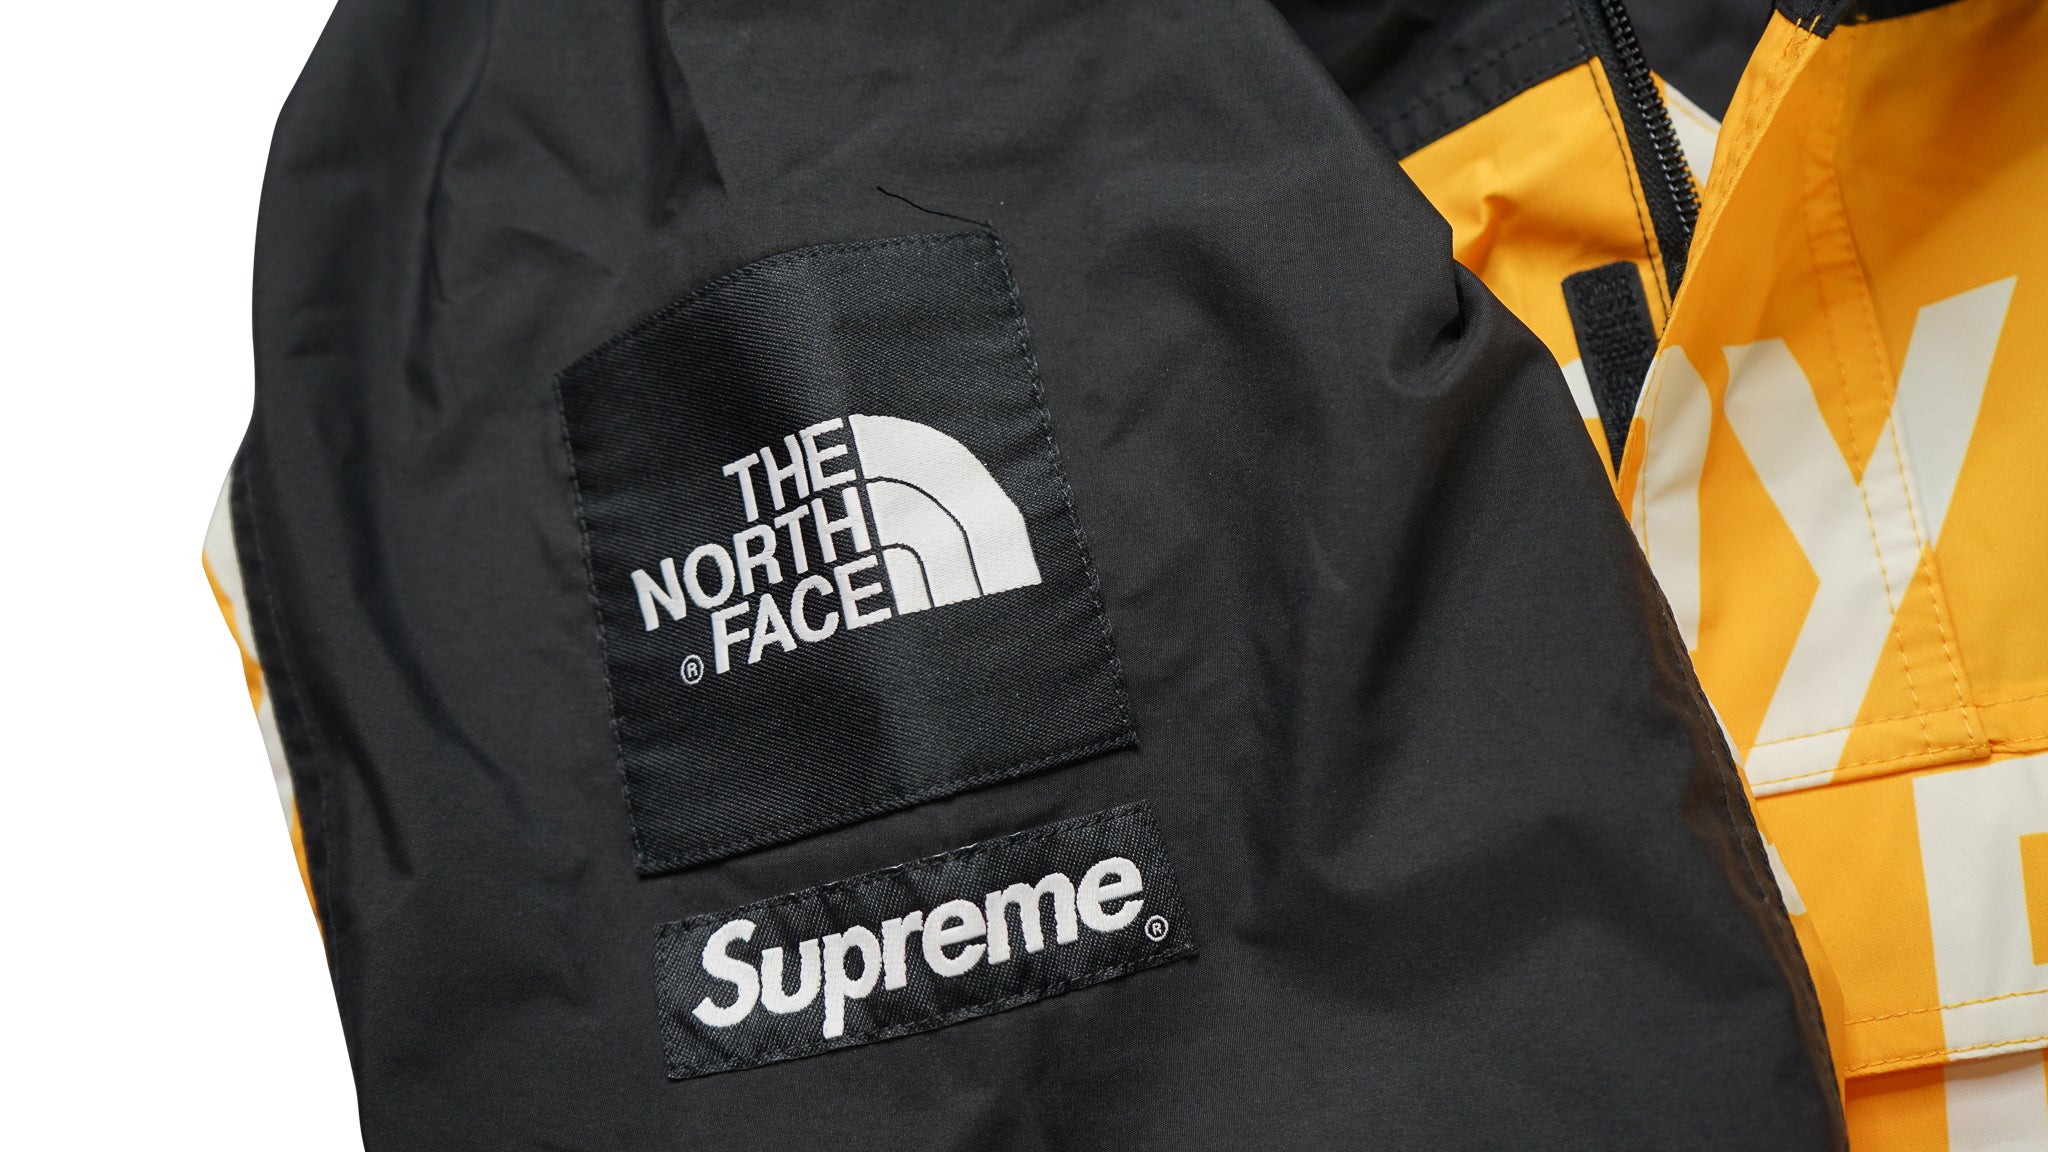 SUPREME THE NORTH FACE BY ANY MEANS MOUNTAIN JACKET YELLOW L FW15 TNF